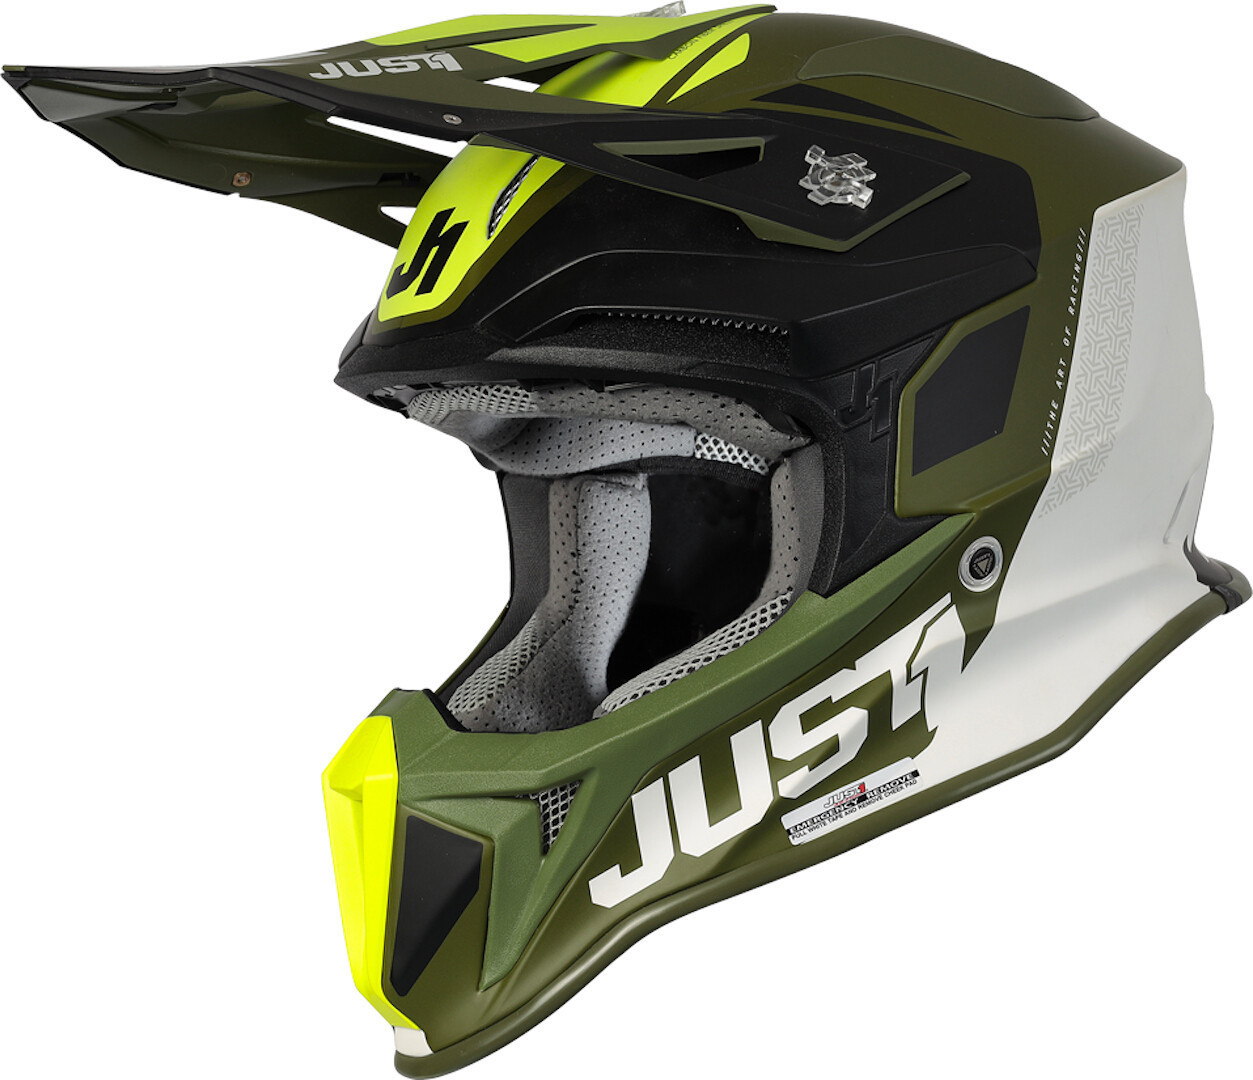 Image of Just1 J18 Pulsar Army Limited Edition Casco motocross, nero-bianco-verde, dimensione S